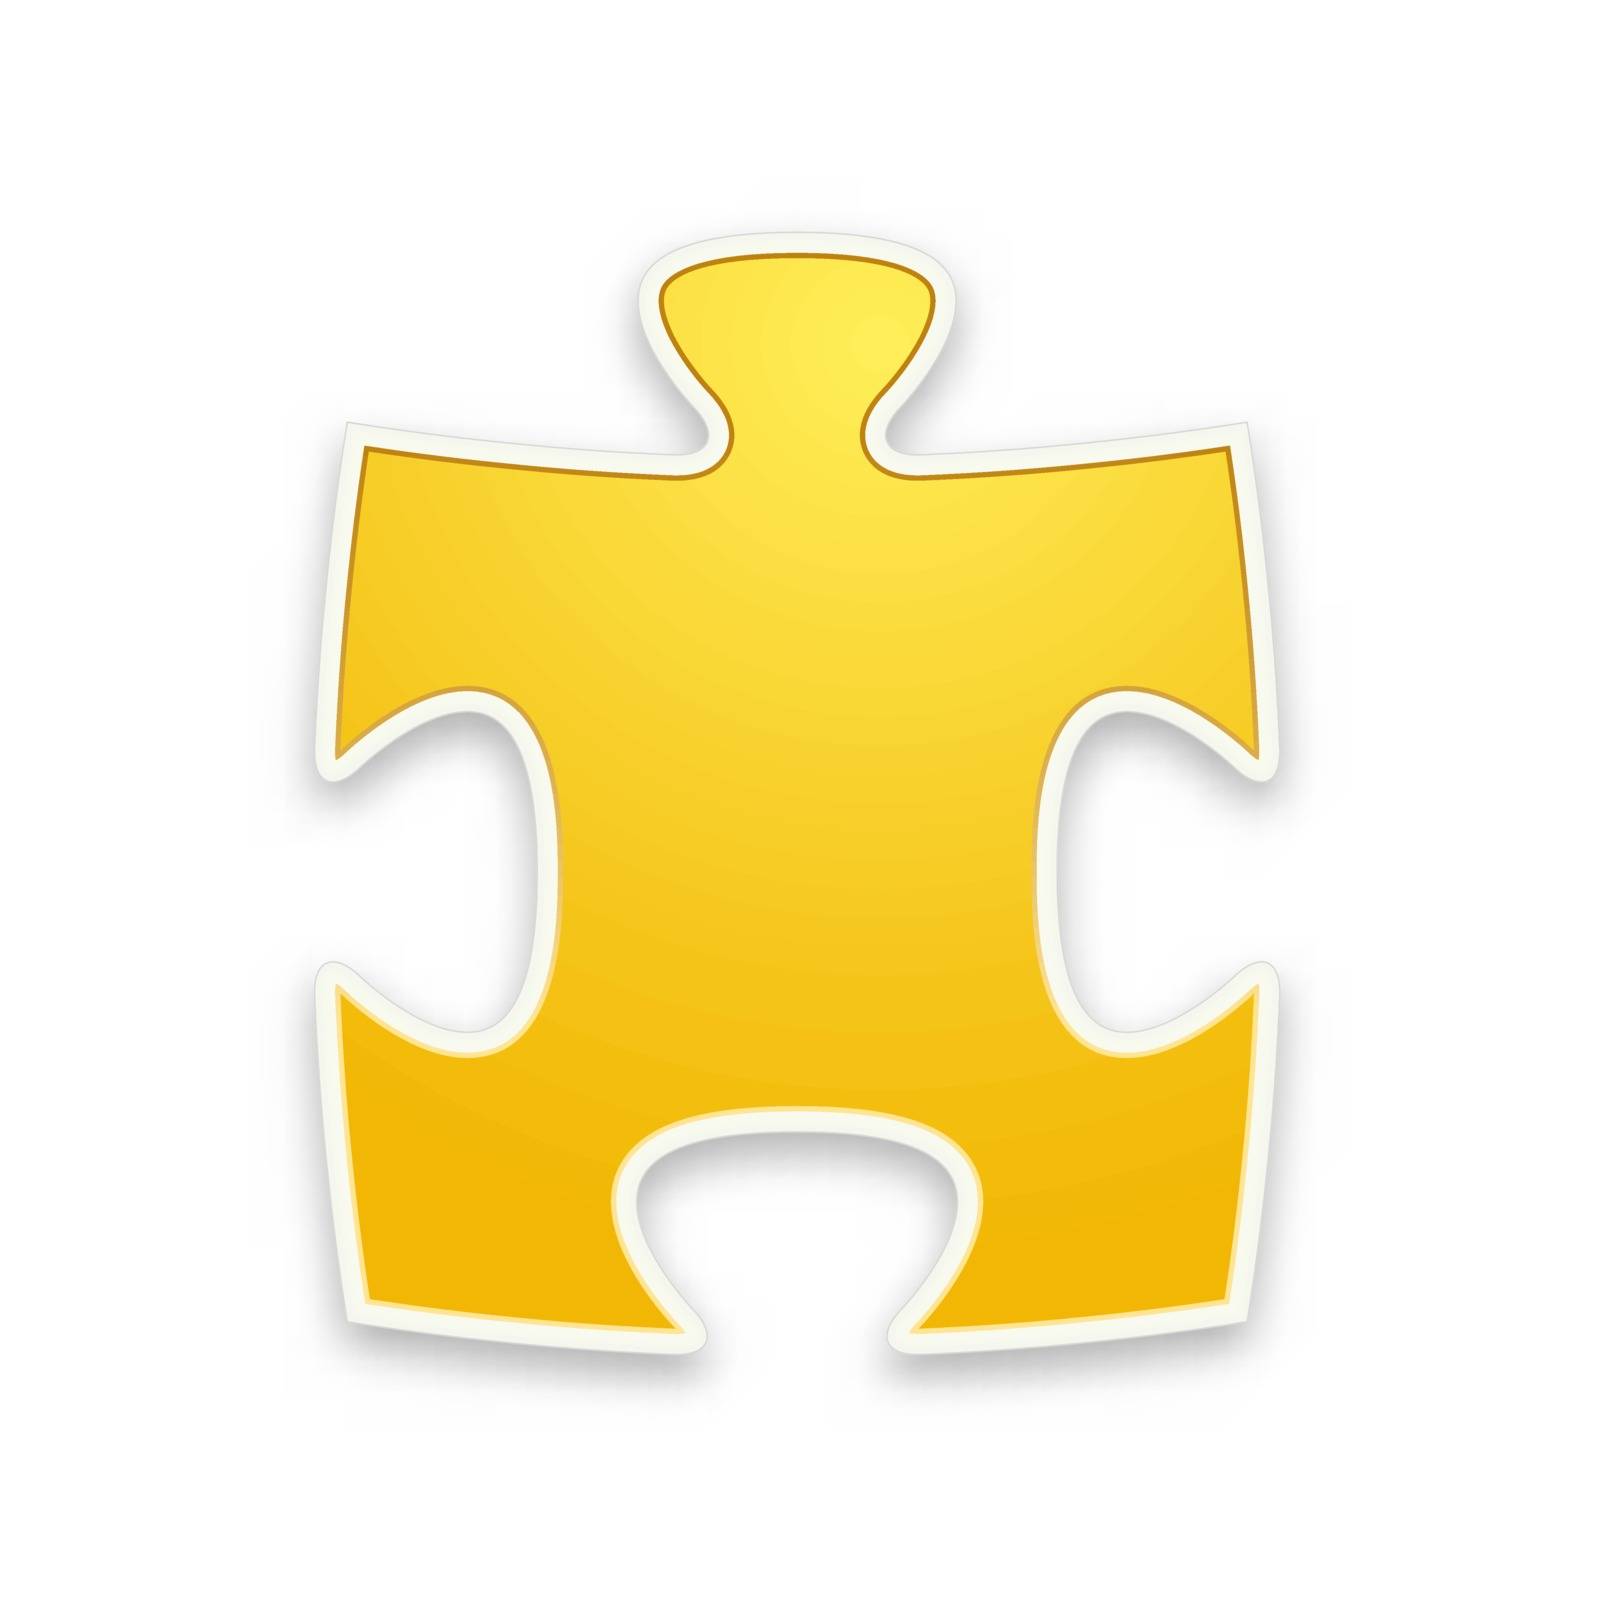 the illustration of glossy yellow puzzle piece